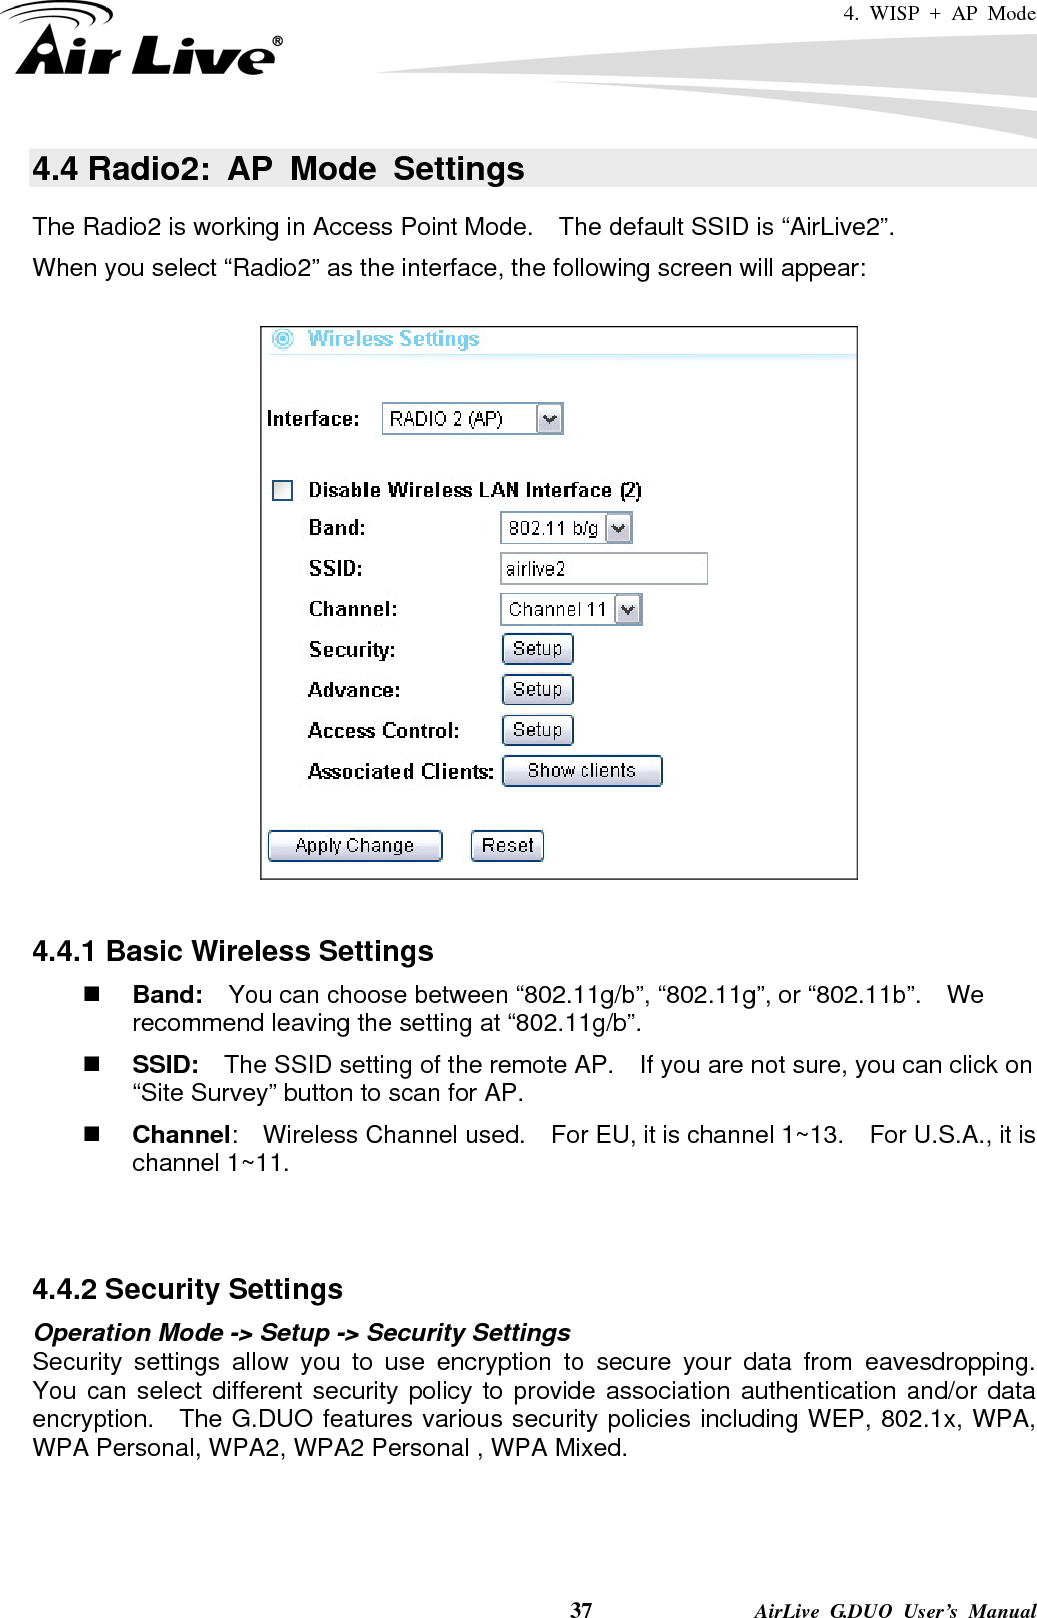 4. WISP + AP Mode    37              AirLive G.DUO User’s Manual 4.4 Radio2: AP Mode Settings The Radio2 is working in Access Point Mode.    The default SSID is “AirLive2”. When you select “Radio2” as the interface, the following screen will appear:    4.4.1 Basic Wireless Settings  Band:    You can choose between “802.11g/b”, “802.11g”, or “802.11b”.    We recommend leaving the setting at “802.11g/b”.  SSID:    The SSID setting of the remote AP.    If you are not sure, you can click on “Site Survey” button to scan for AP.  Channel:  Wireless Channel used.  For EU, it is channel 1~13.    For U.S.A., it is channel 1~11.     4.4.2 Security Settings Operation Mode -&gt; Setup -&gt; Security Settings Security settings allow you to use encryption to secure your data from eavesdropping.  You can select different security policy to provide association authentication and/or data encryption.    The G.DUO features various security policies including WEP, 802.1x, WPA, WPA Personal, WPA2, WPA2 Personal , WPA Mixed.      